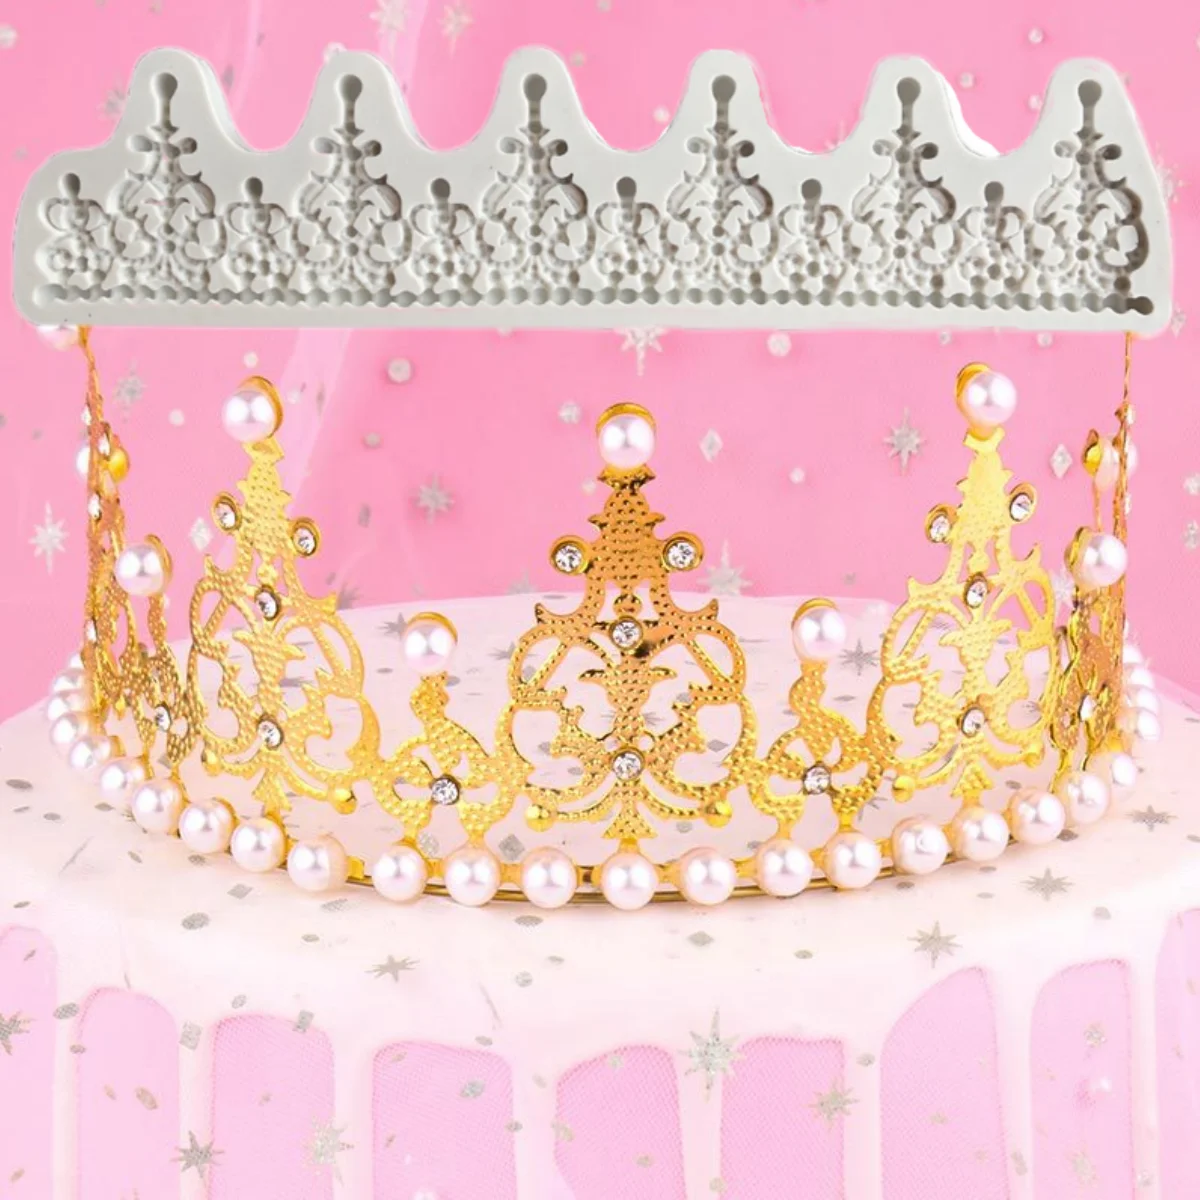 

3D Large Queen Crown Silicone Molds DIY Fondant Chocolate Sugarcraft Candy Resin Mould Cake Rim Decor Craft Kitchen Baking Tools